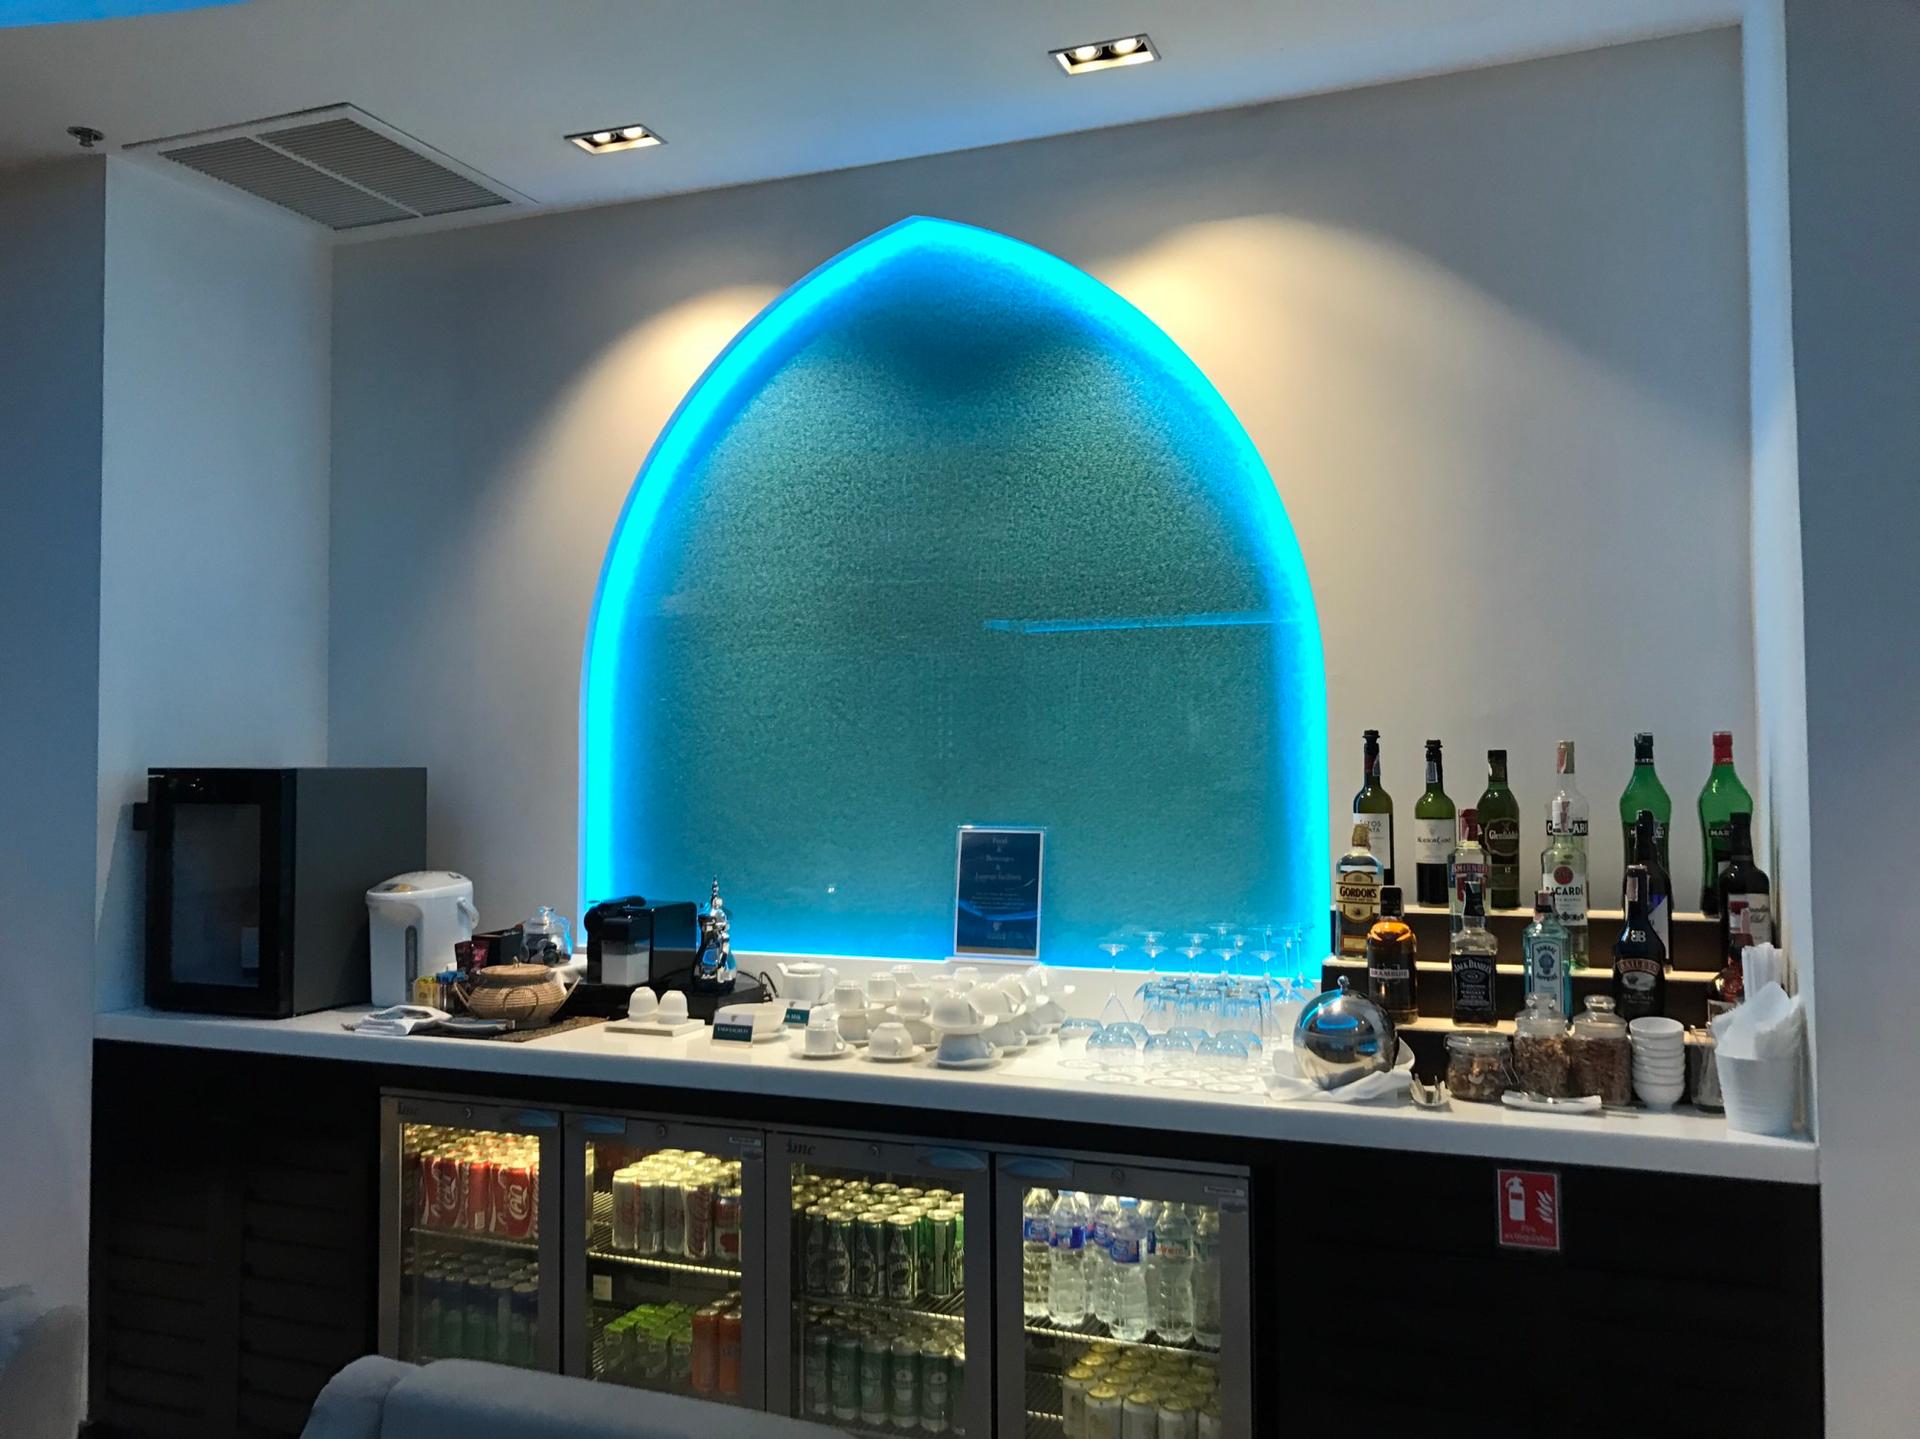 Oman Air First and Business Class Lounge image 15 of 42